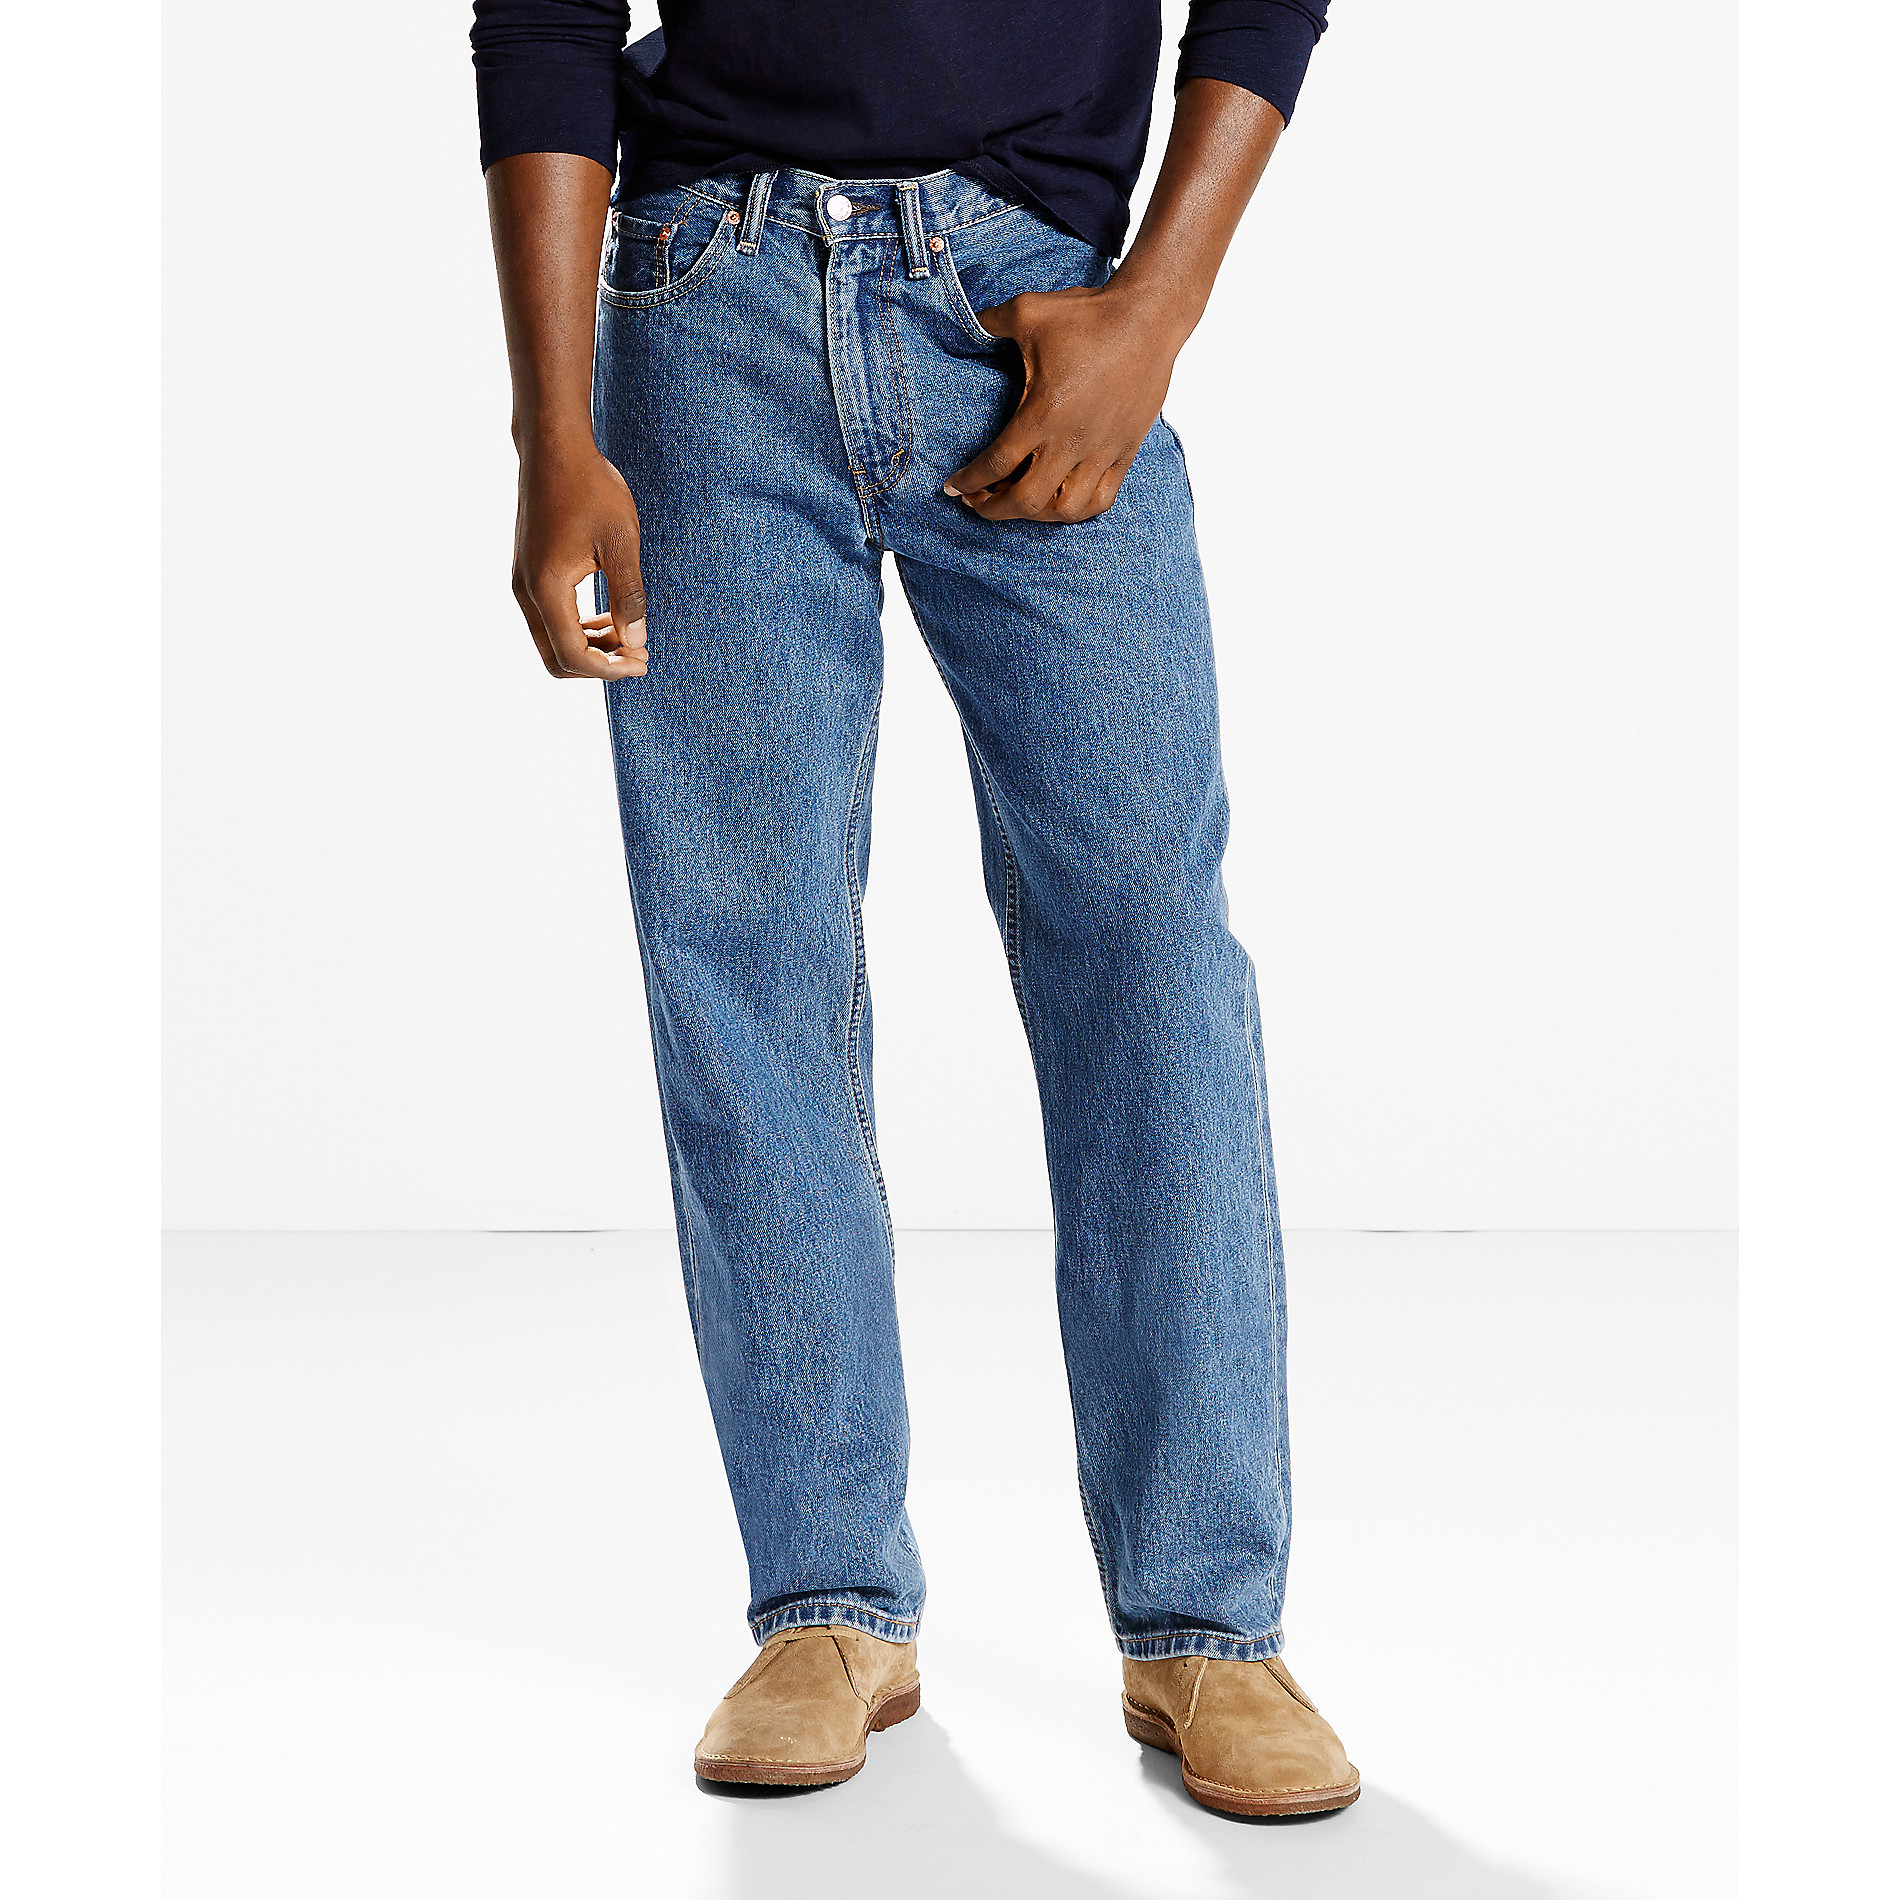 Relaxed Fit Levi's Men's Jeans - Sears